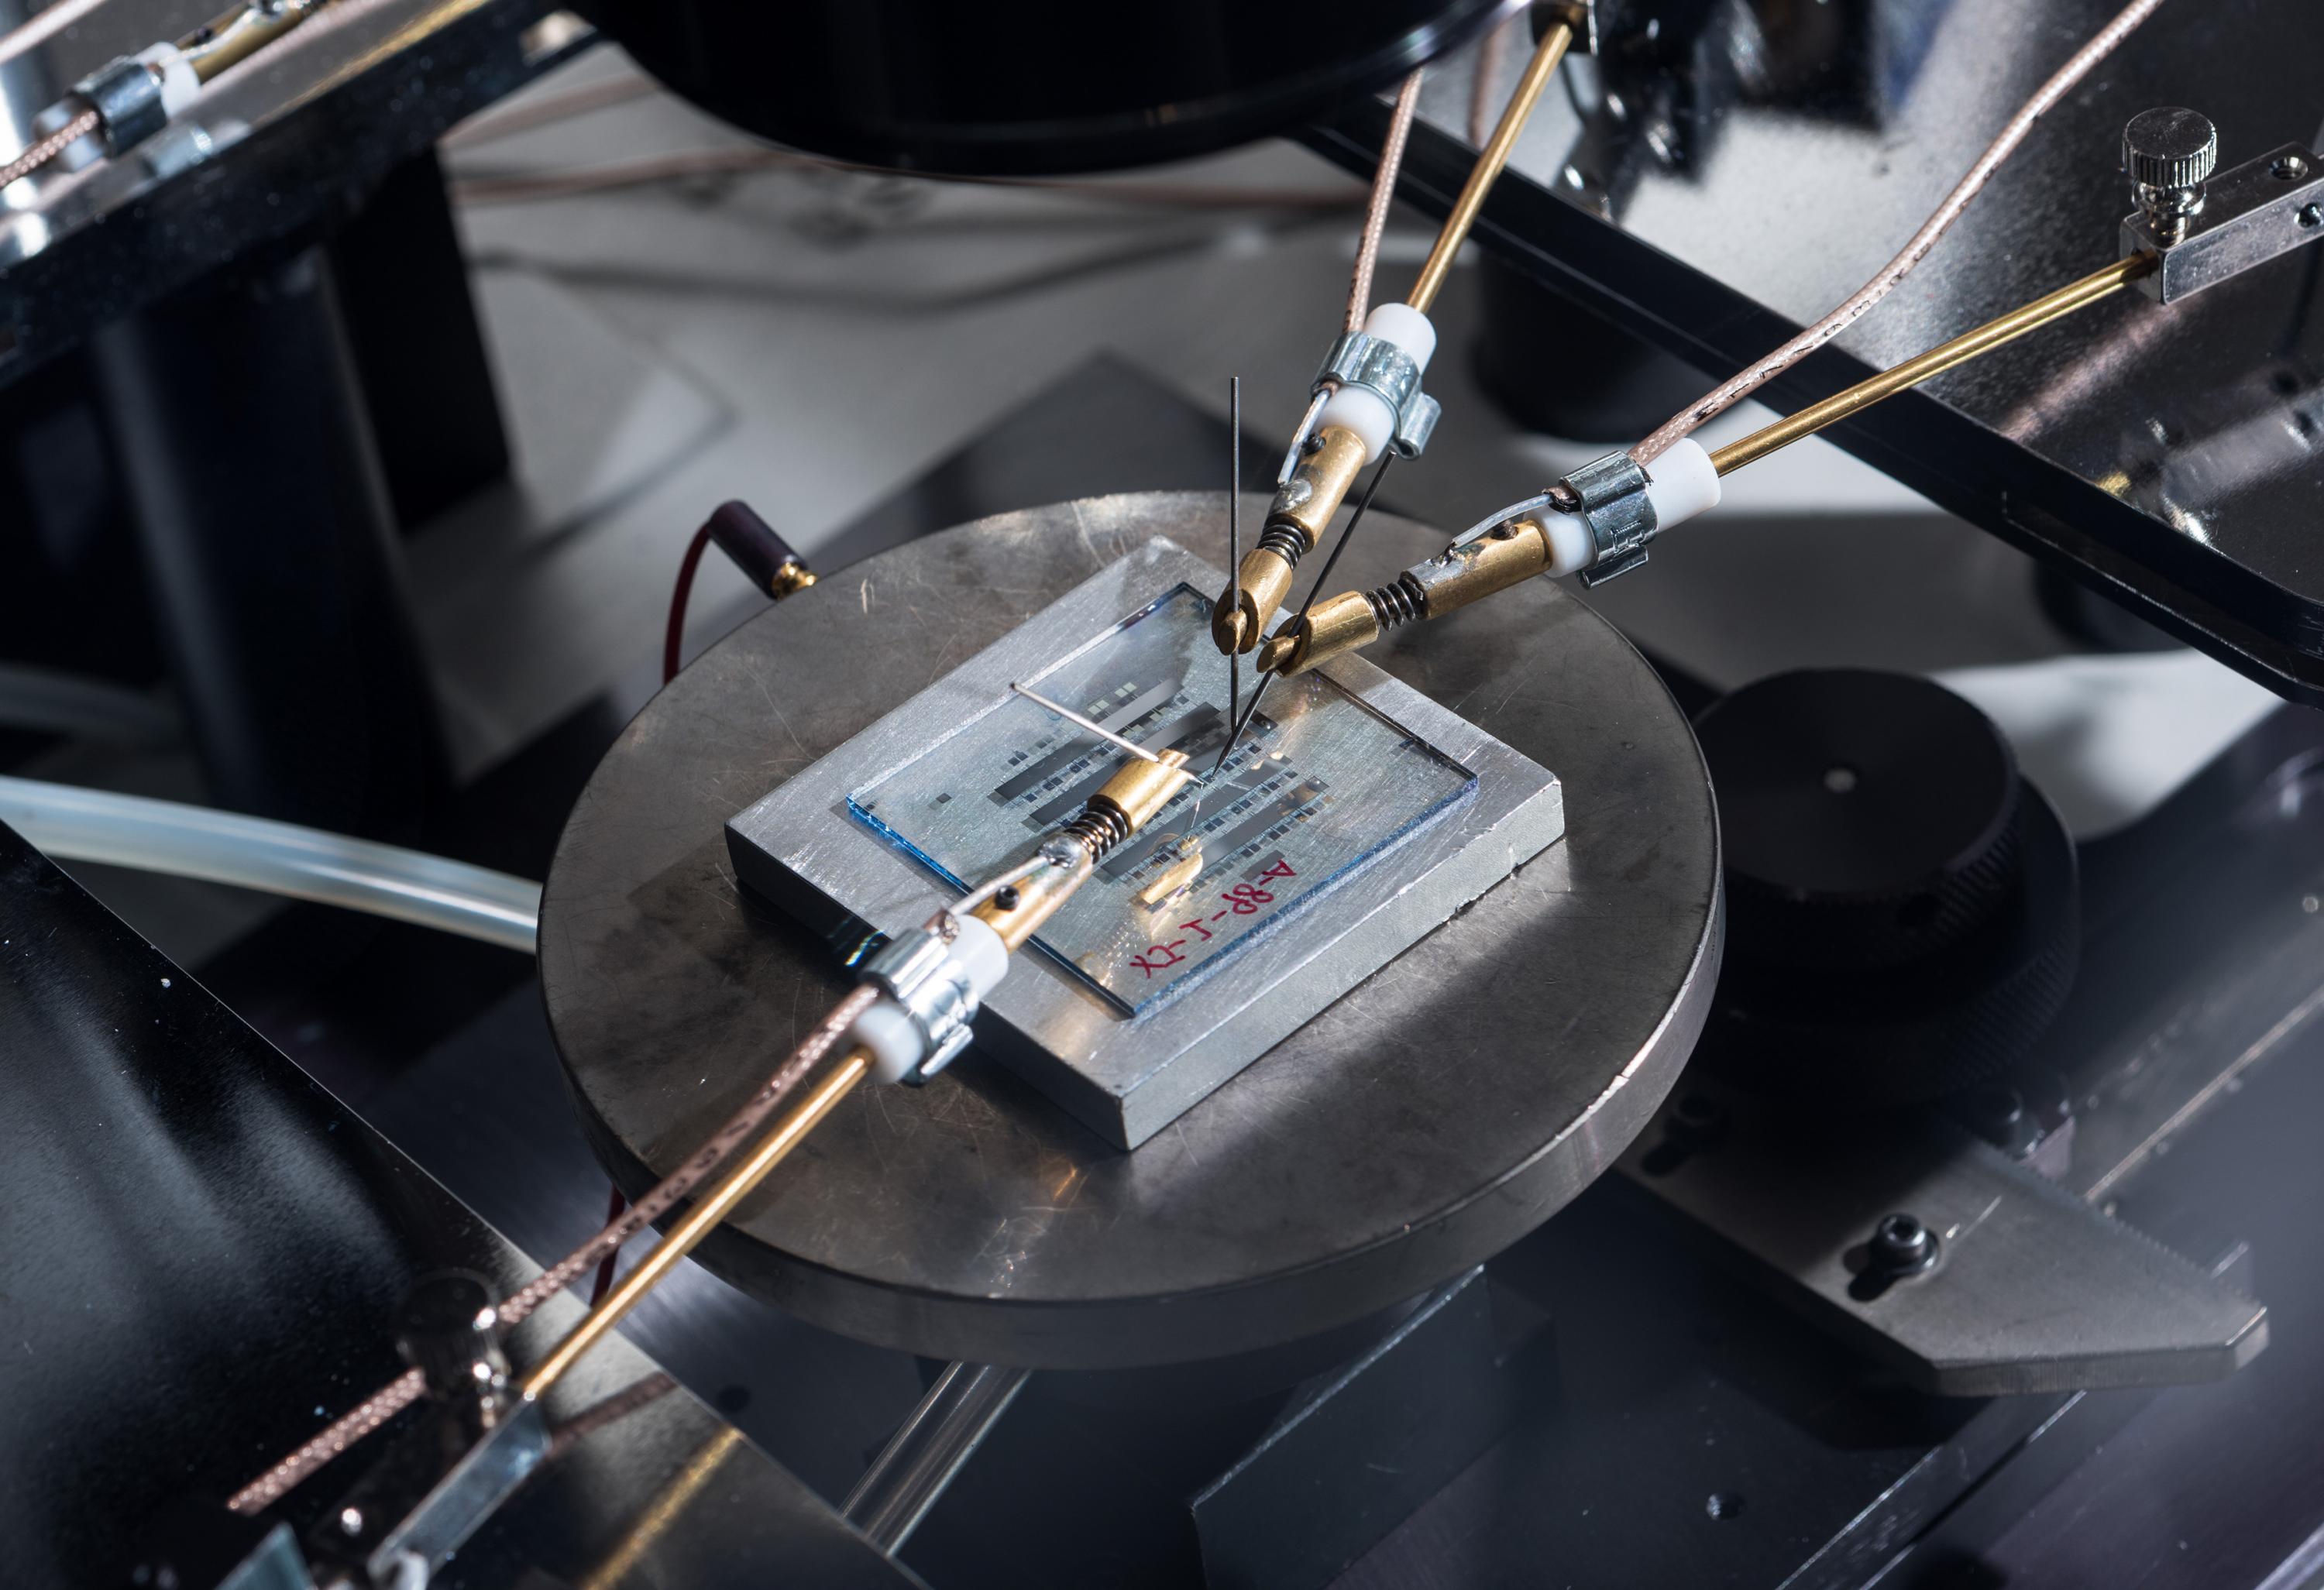 Image shows organic-thin film transistors with a nanostructured gate dielectric under continuous testing on a probe station. (Credit: Rob Felt, Georgia Tech)